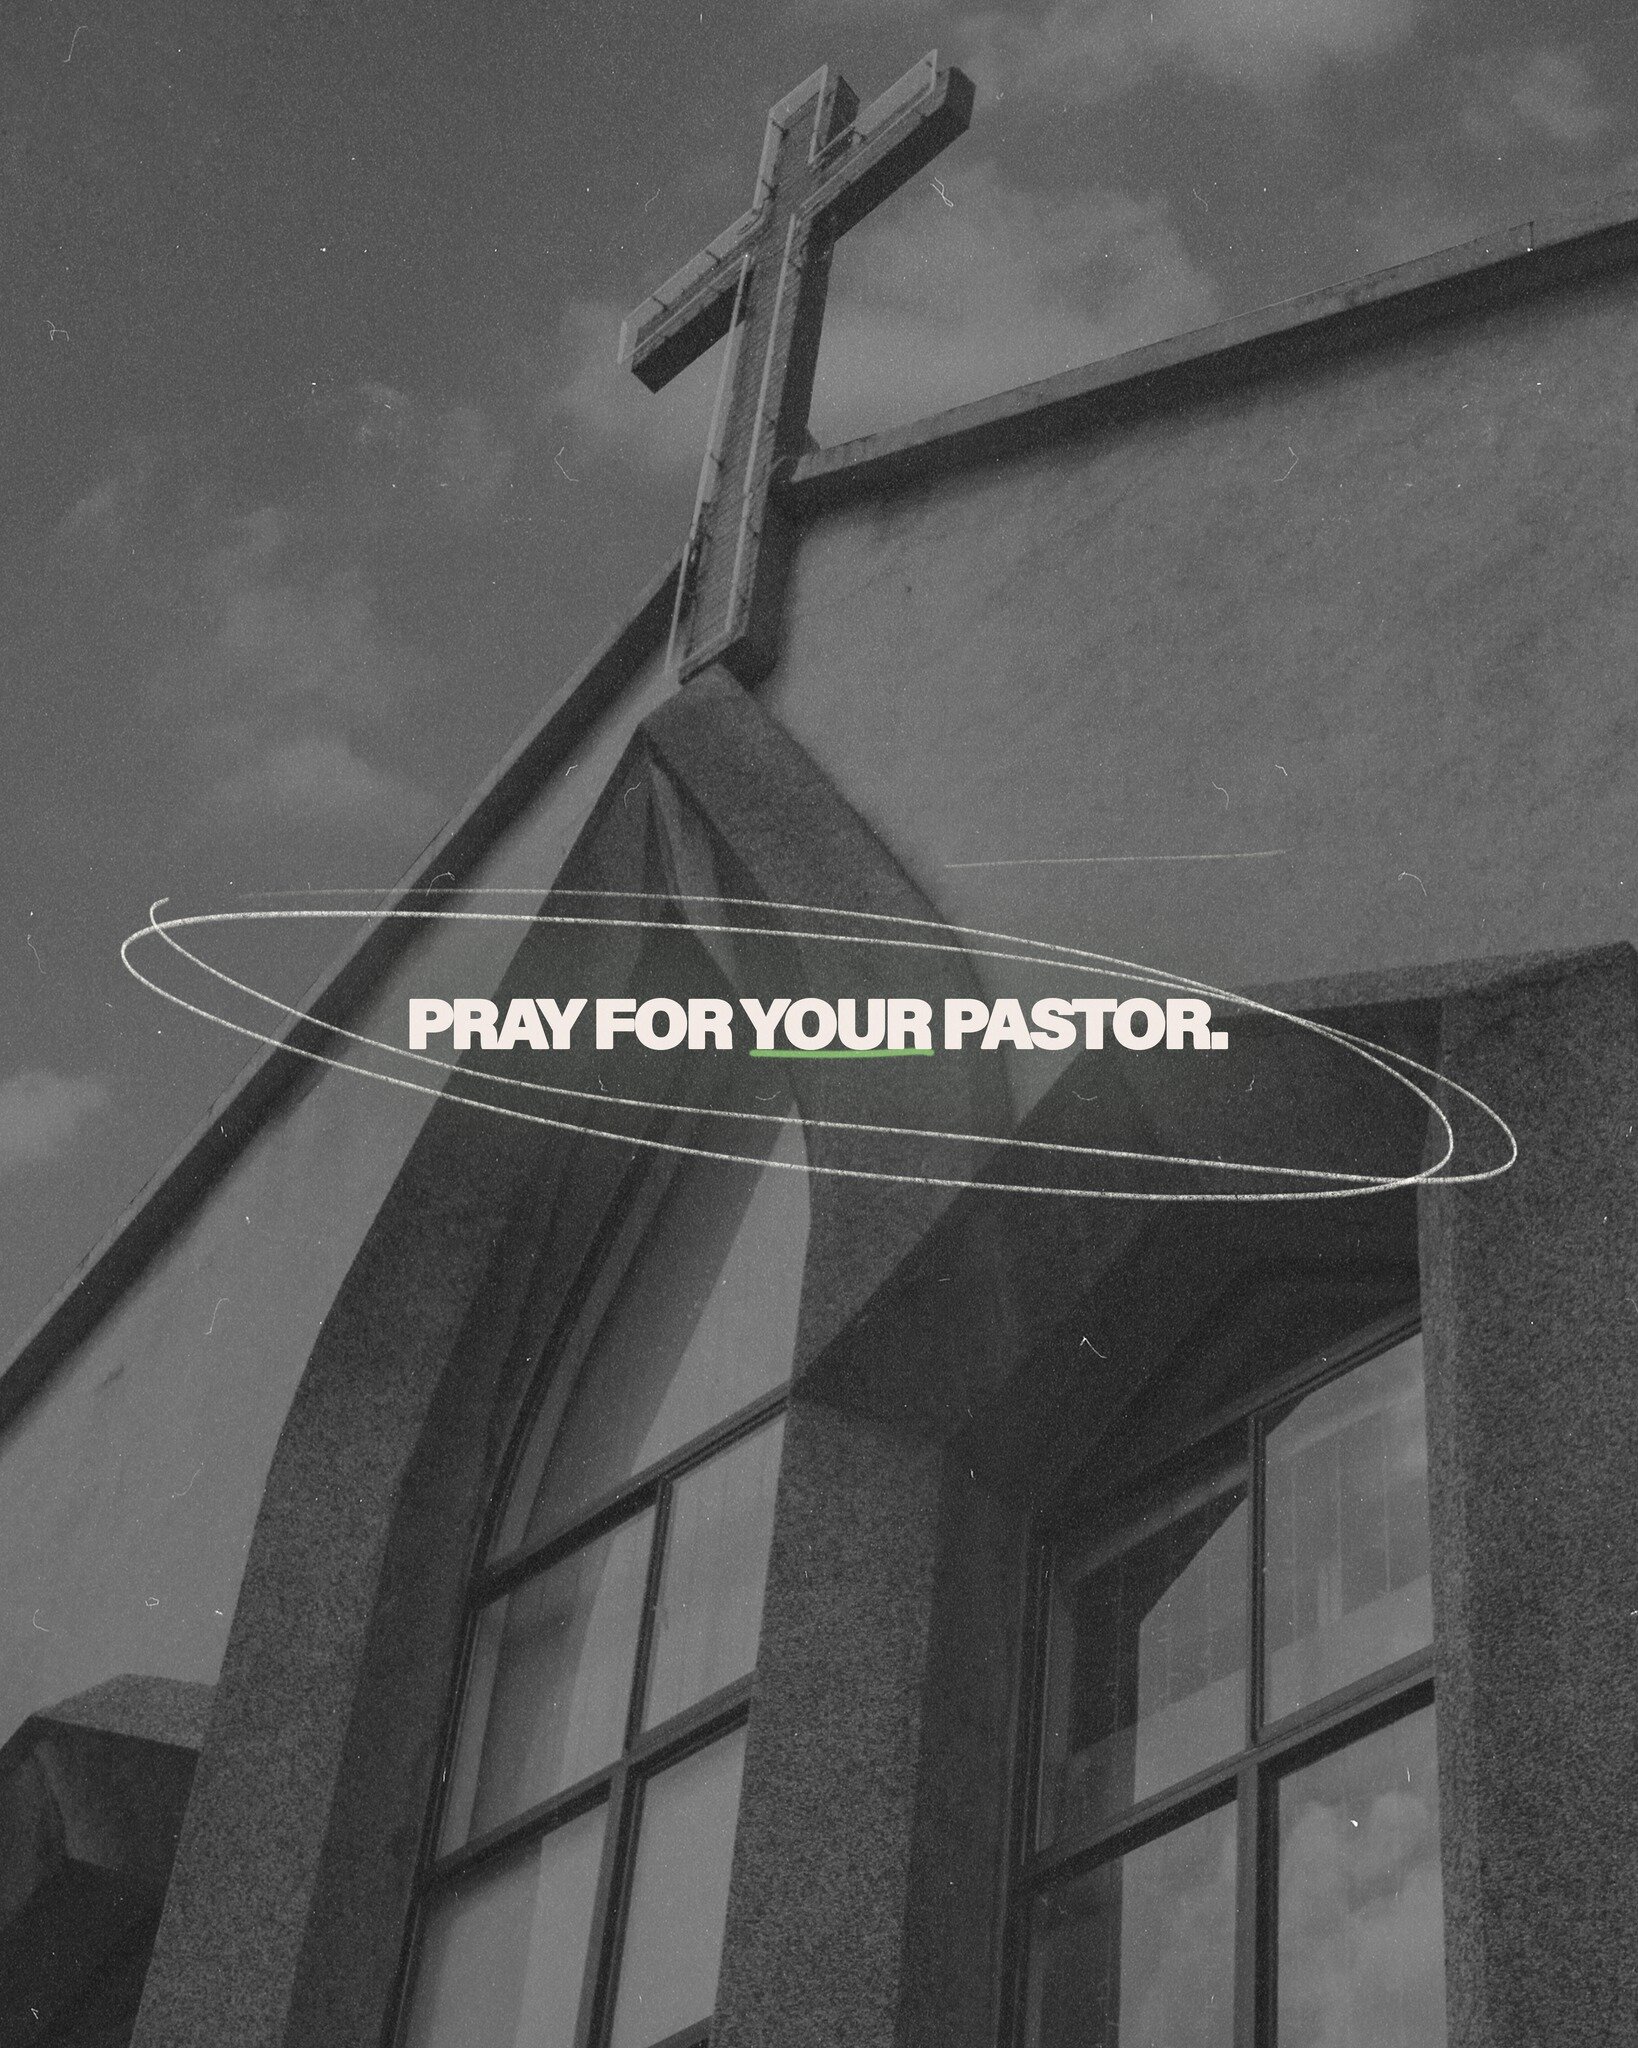 Did you know October is Pastor Appreciation month? Many take this month as an opportunity to show their support for the pastors in their lives. At Trellis, we are taking this month to pray for all of our pastors at every stage of their ministry journ